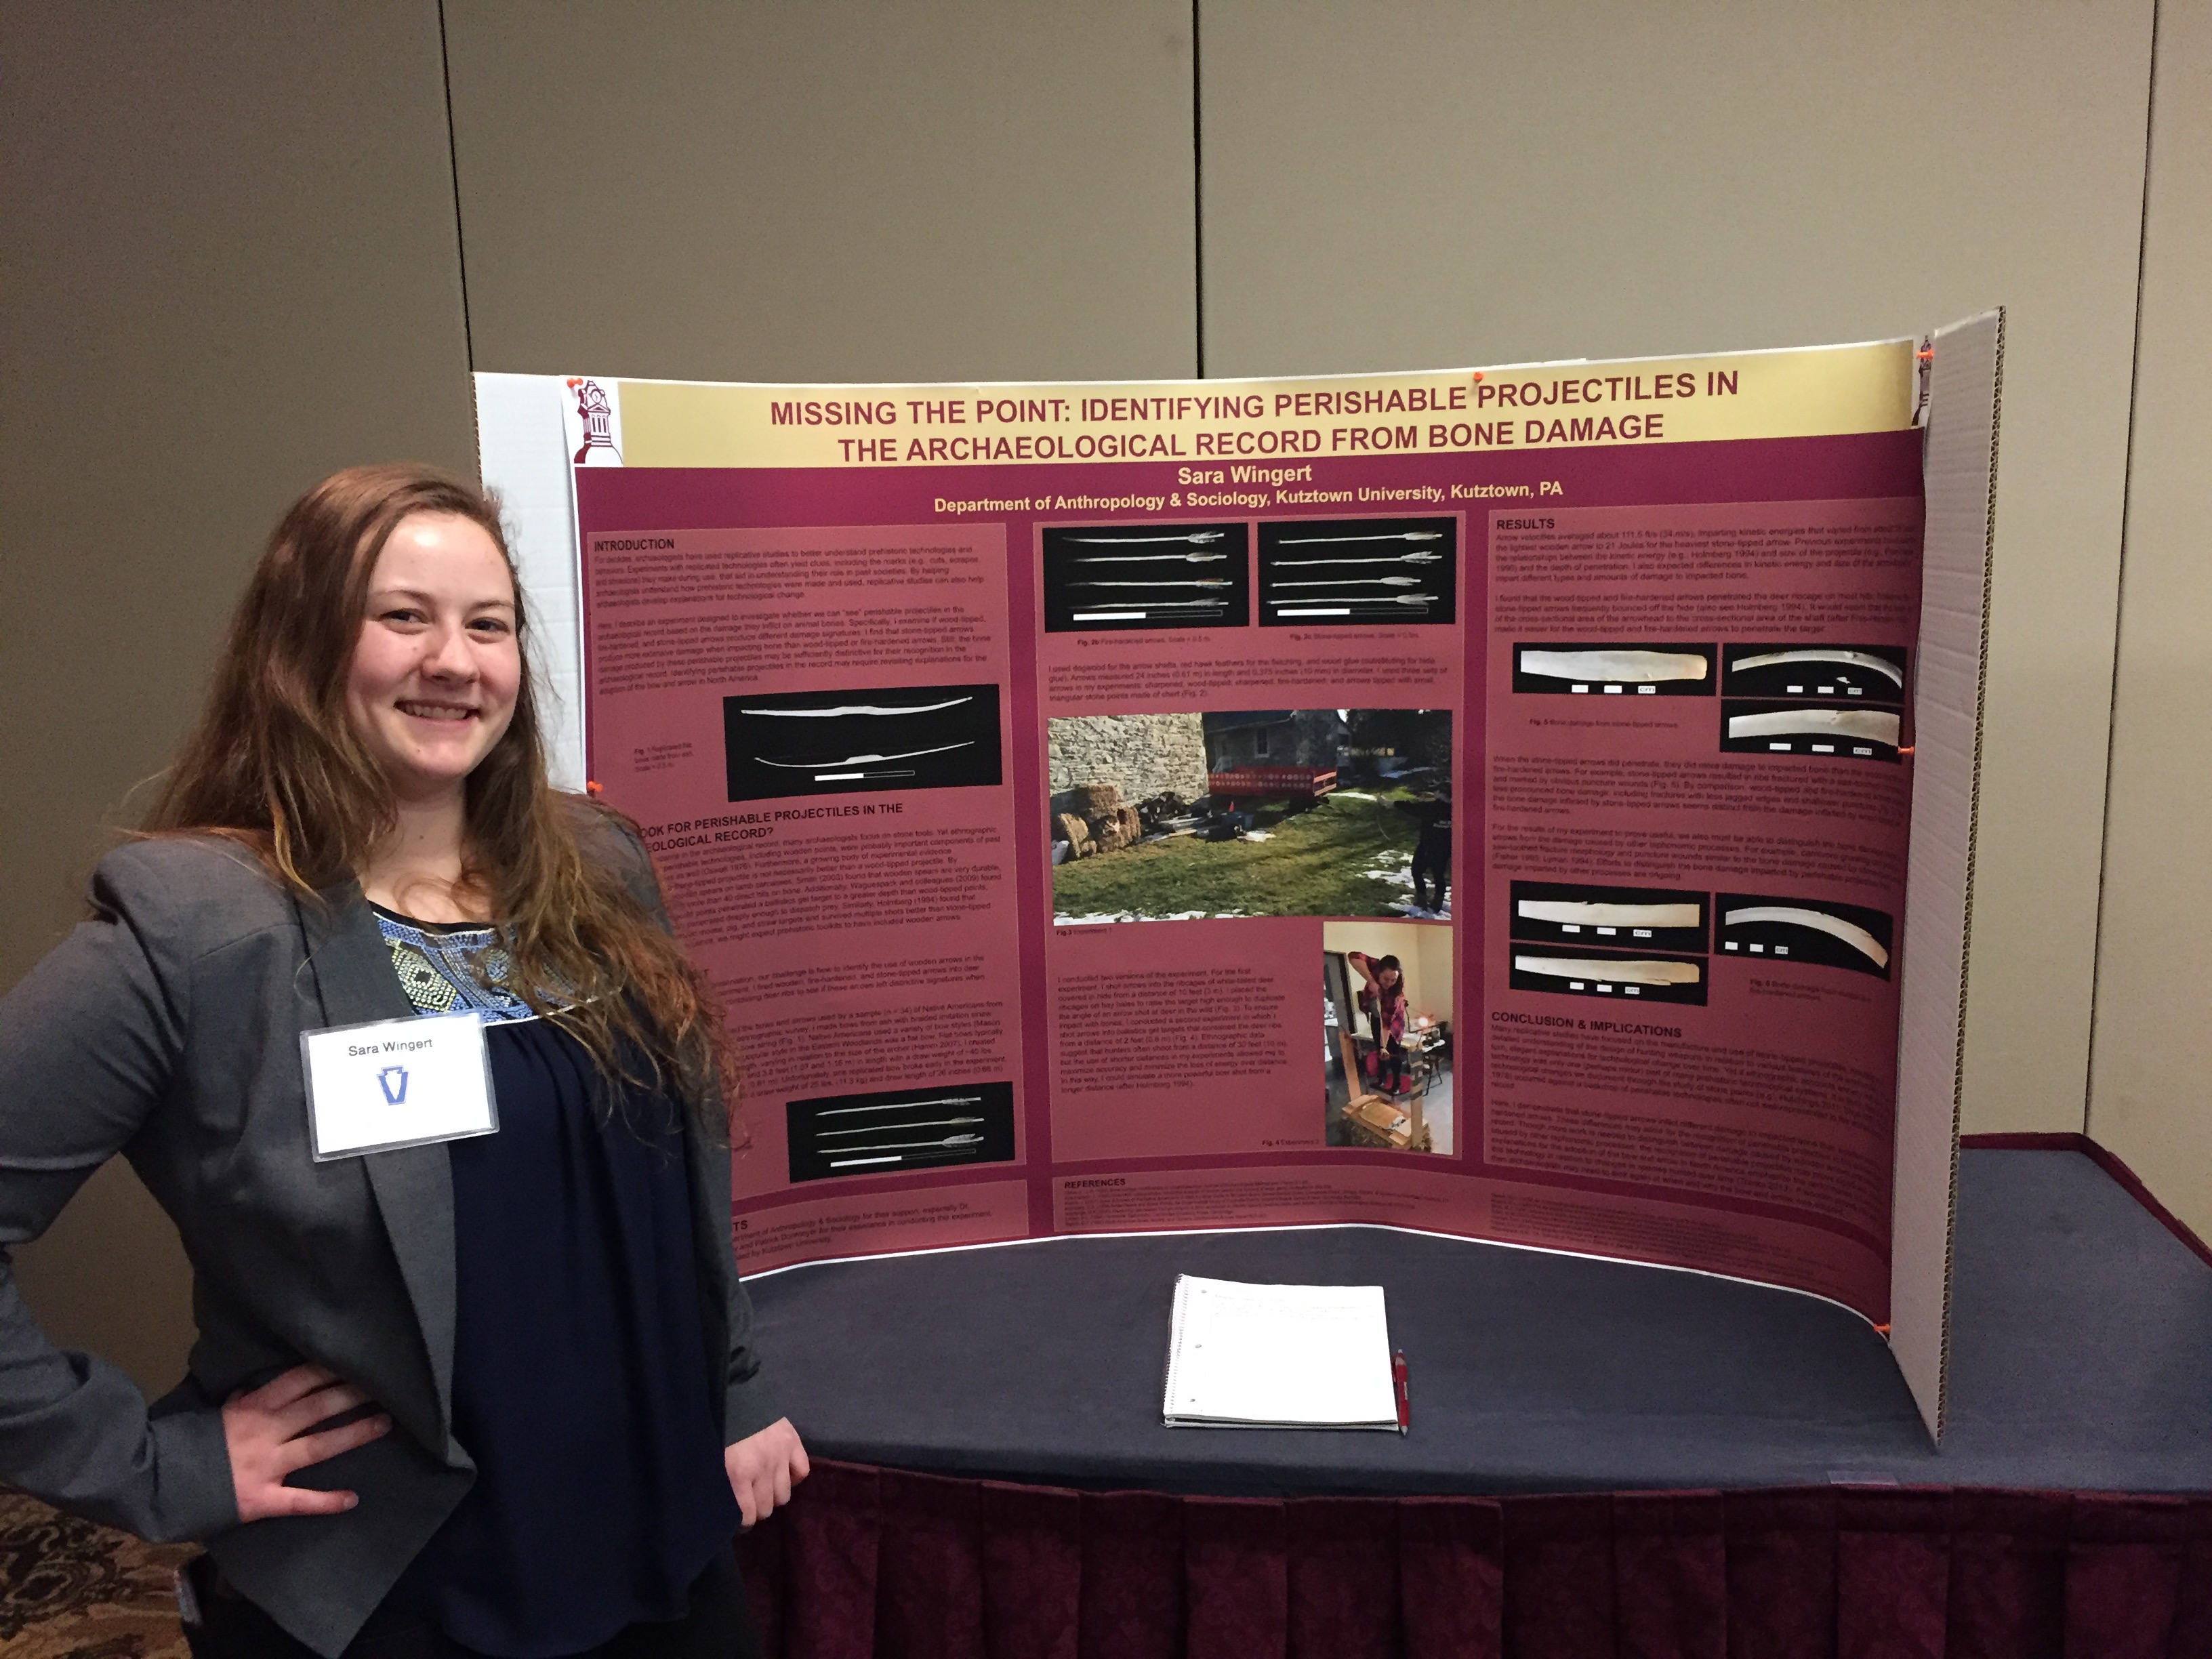 Female student smiling and standing next to her presentation poster on "Missing the Point: Identifying  perishable projectiles in the archaeological record from bone damage."